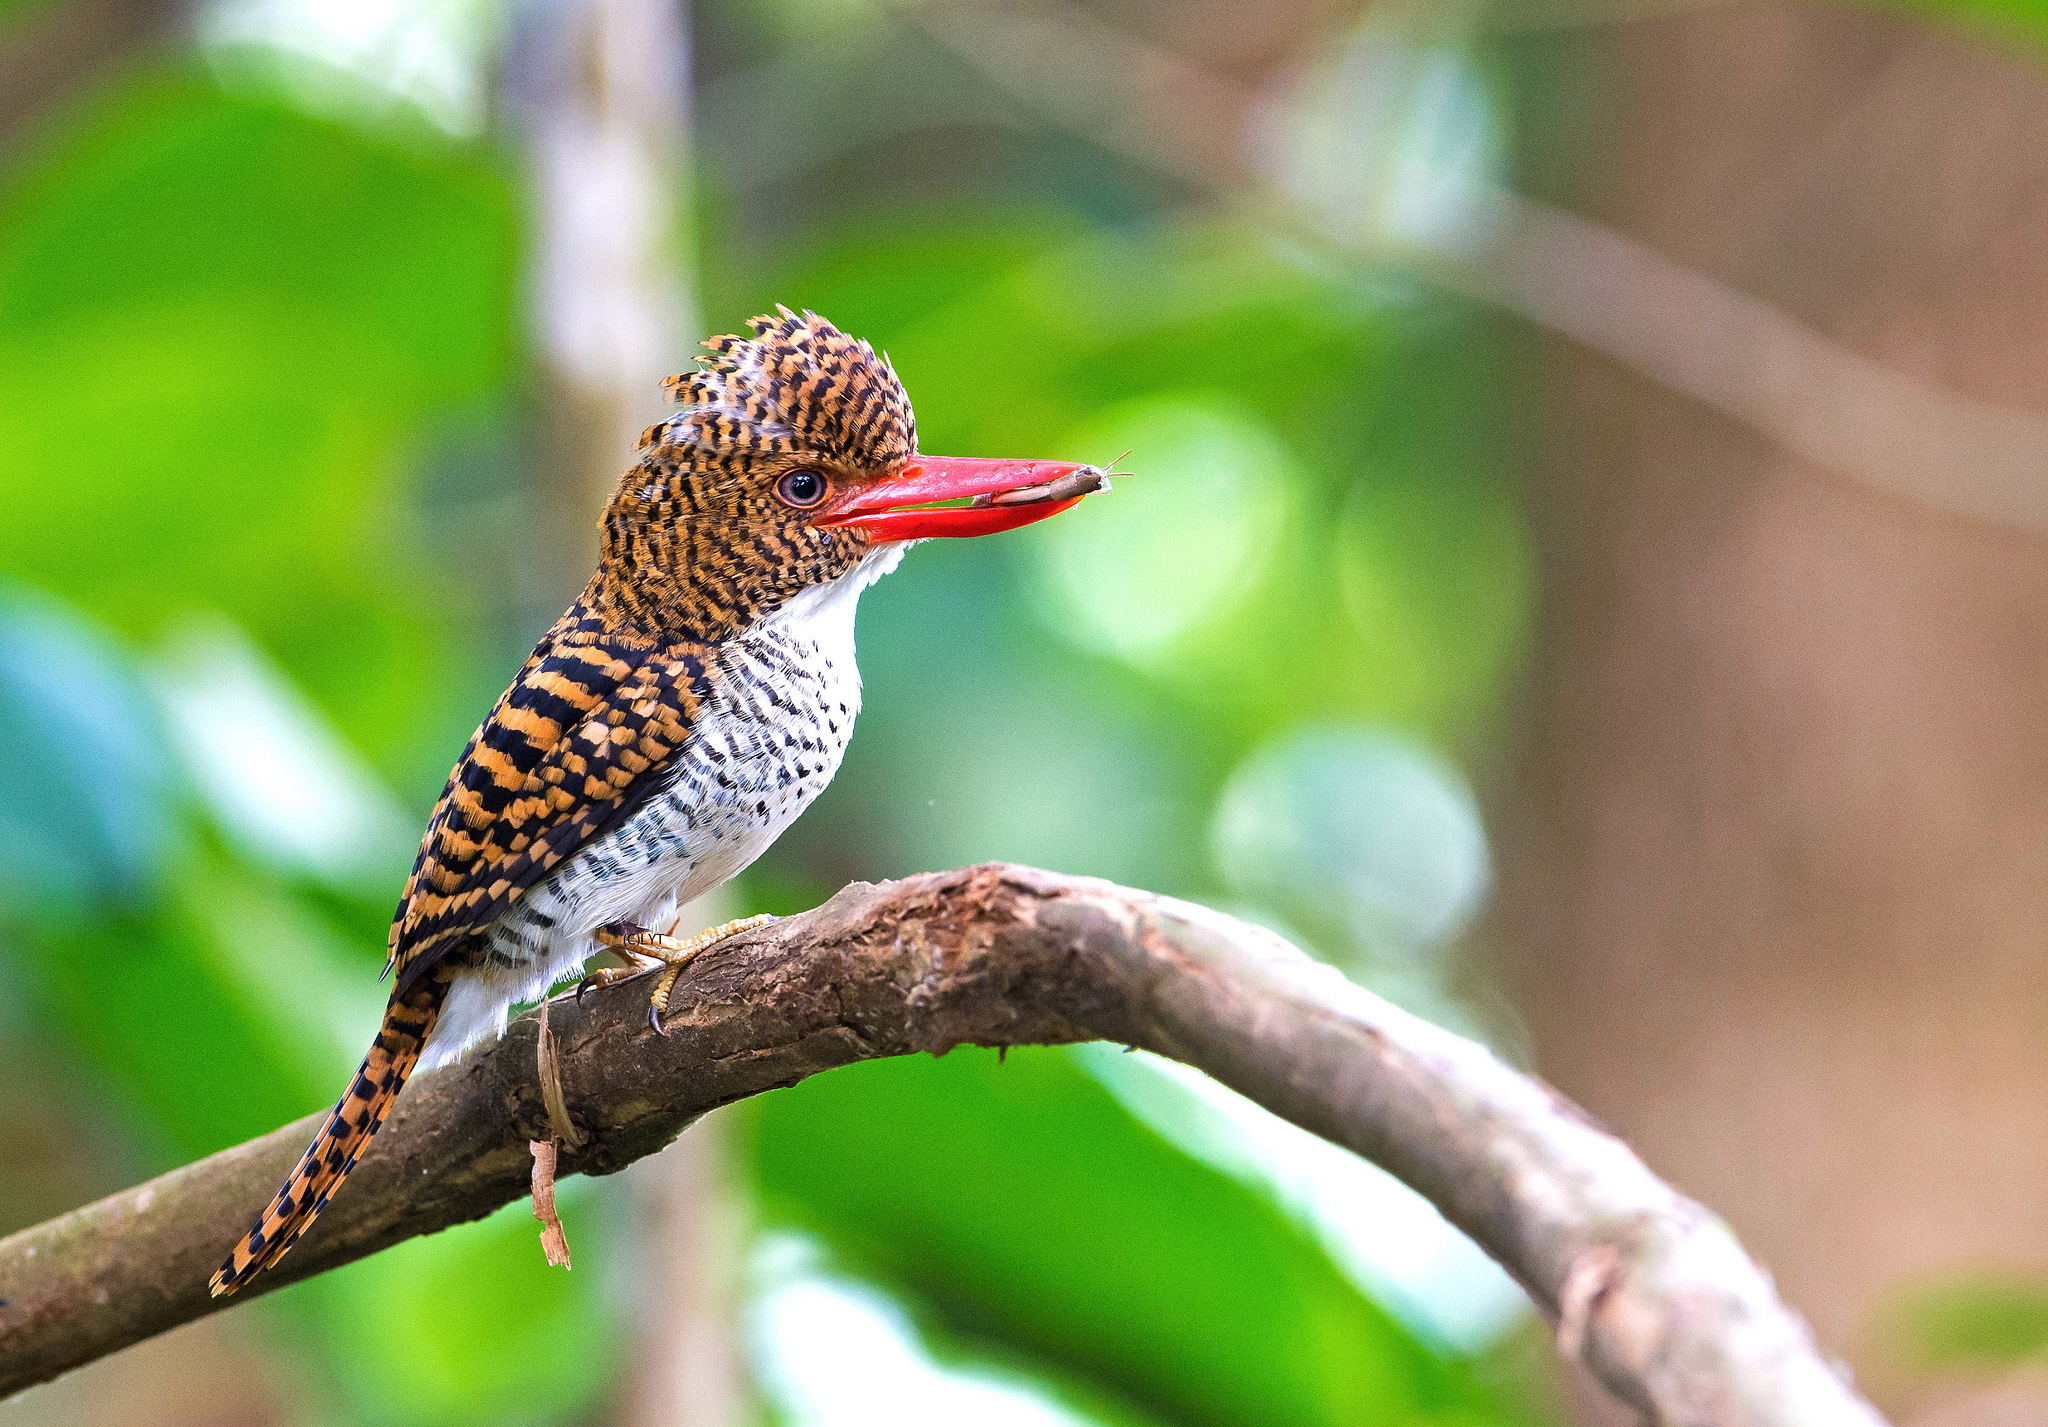 Female Banded Kingfisher by Andy_LYT